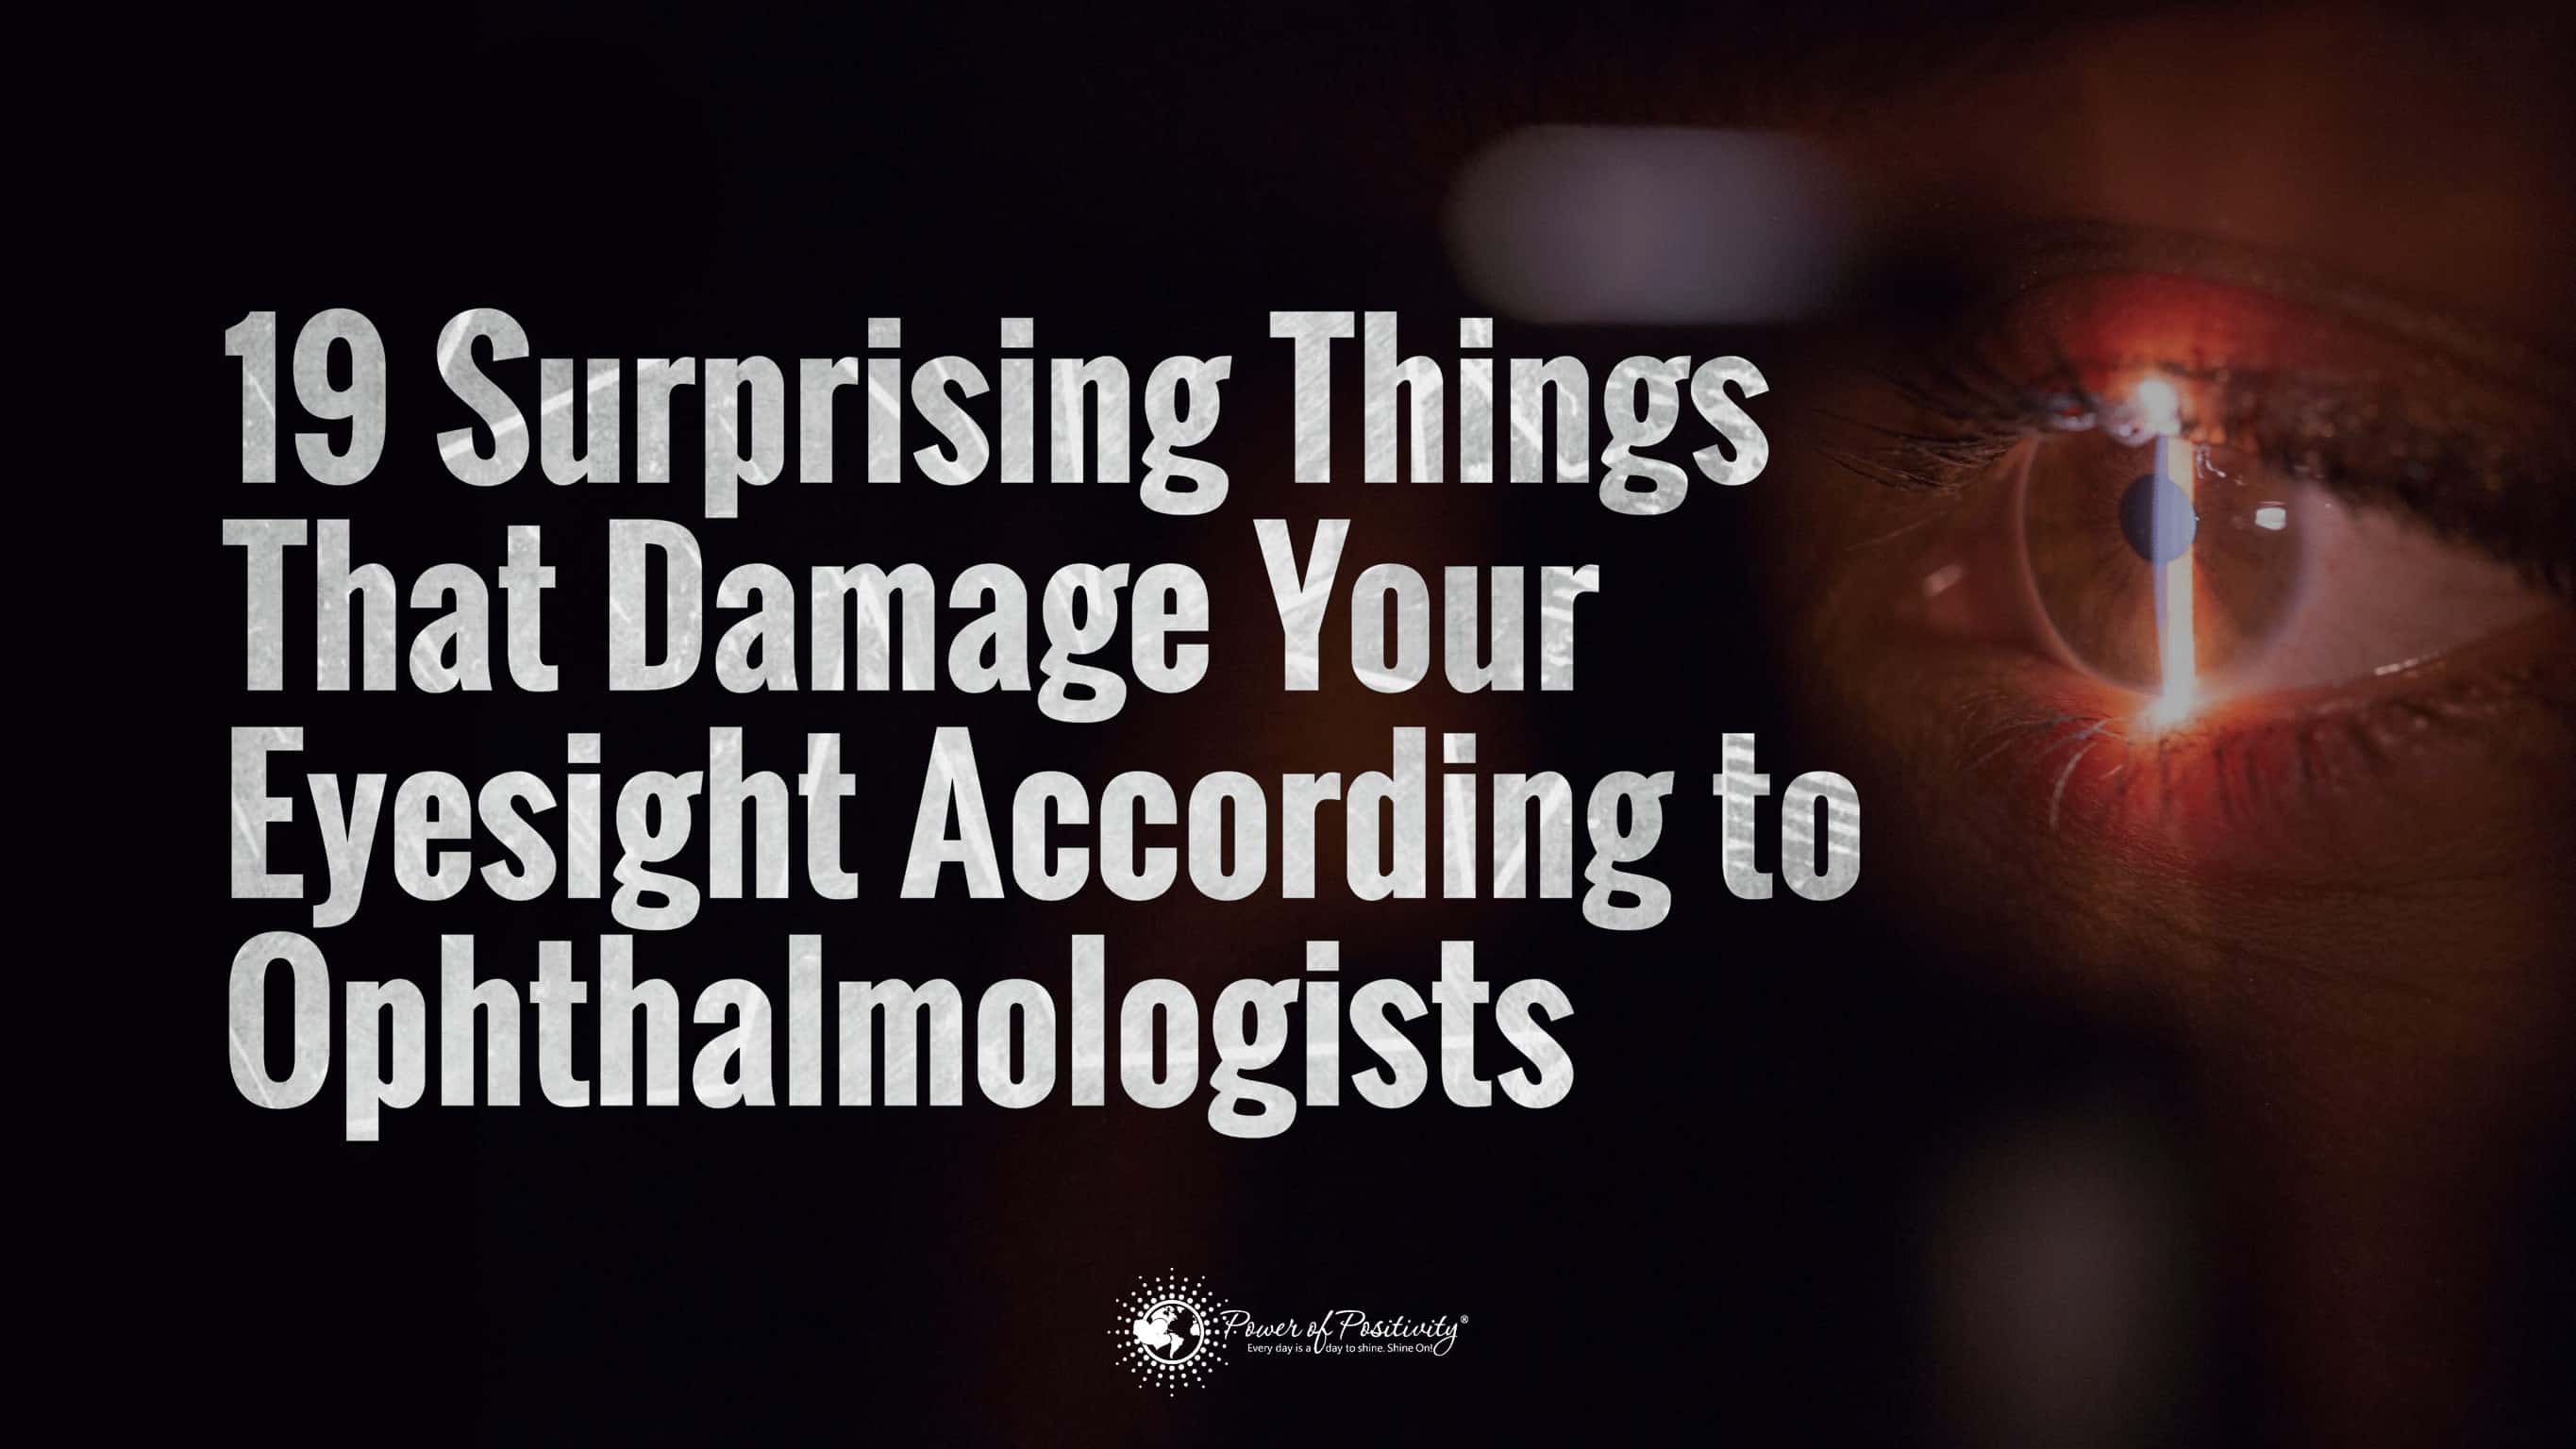 19 Surprising Things That Damage Your Eyesight According to Ophthalmologists